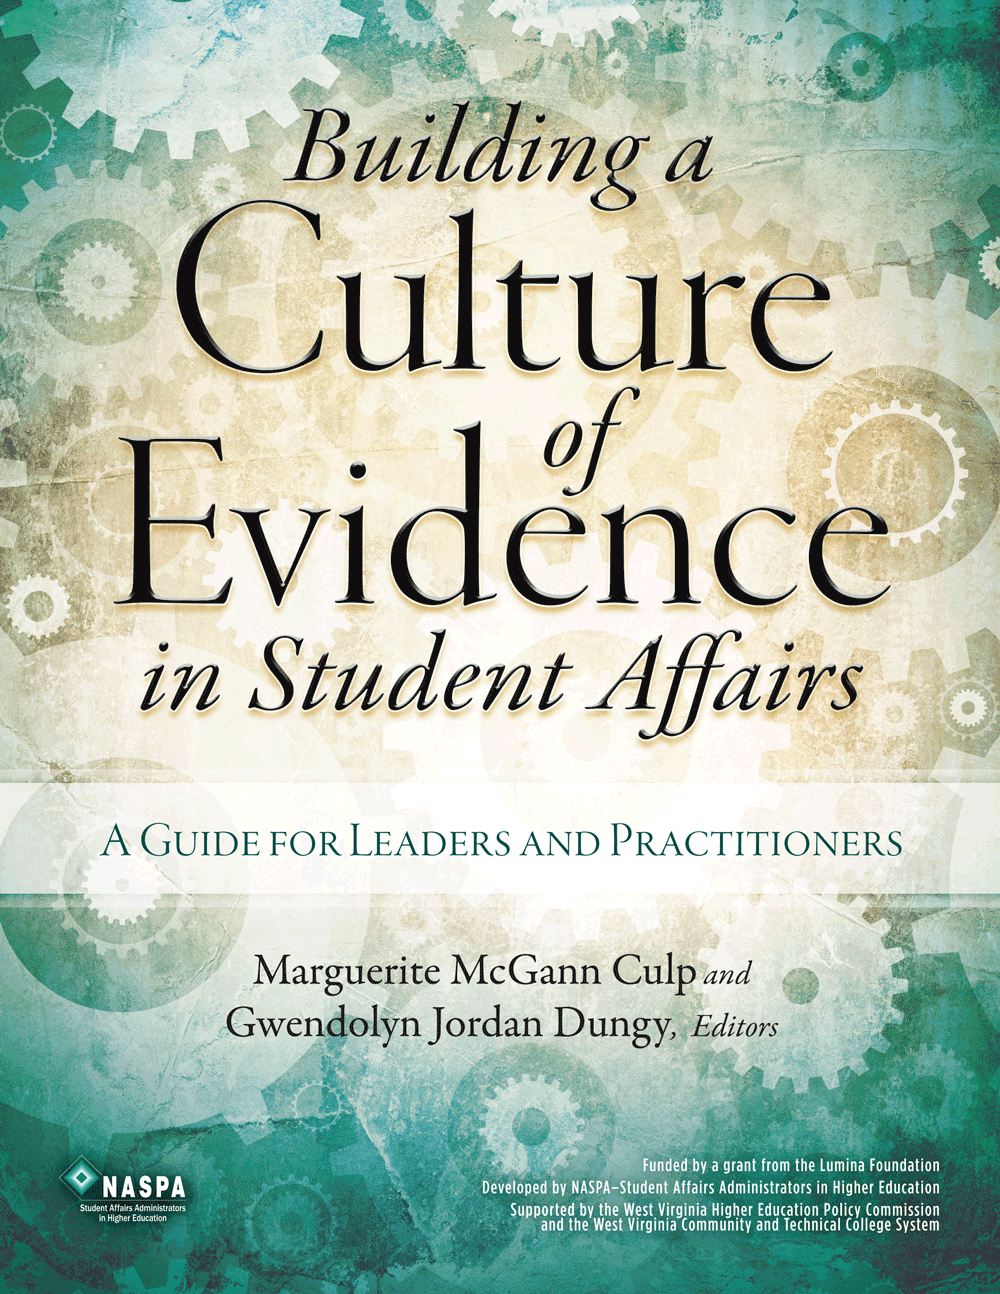 Building a Culture of Evidence in Student Affairs: A Guide for Leaders and Practitioners